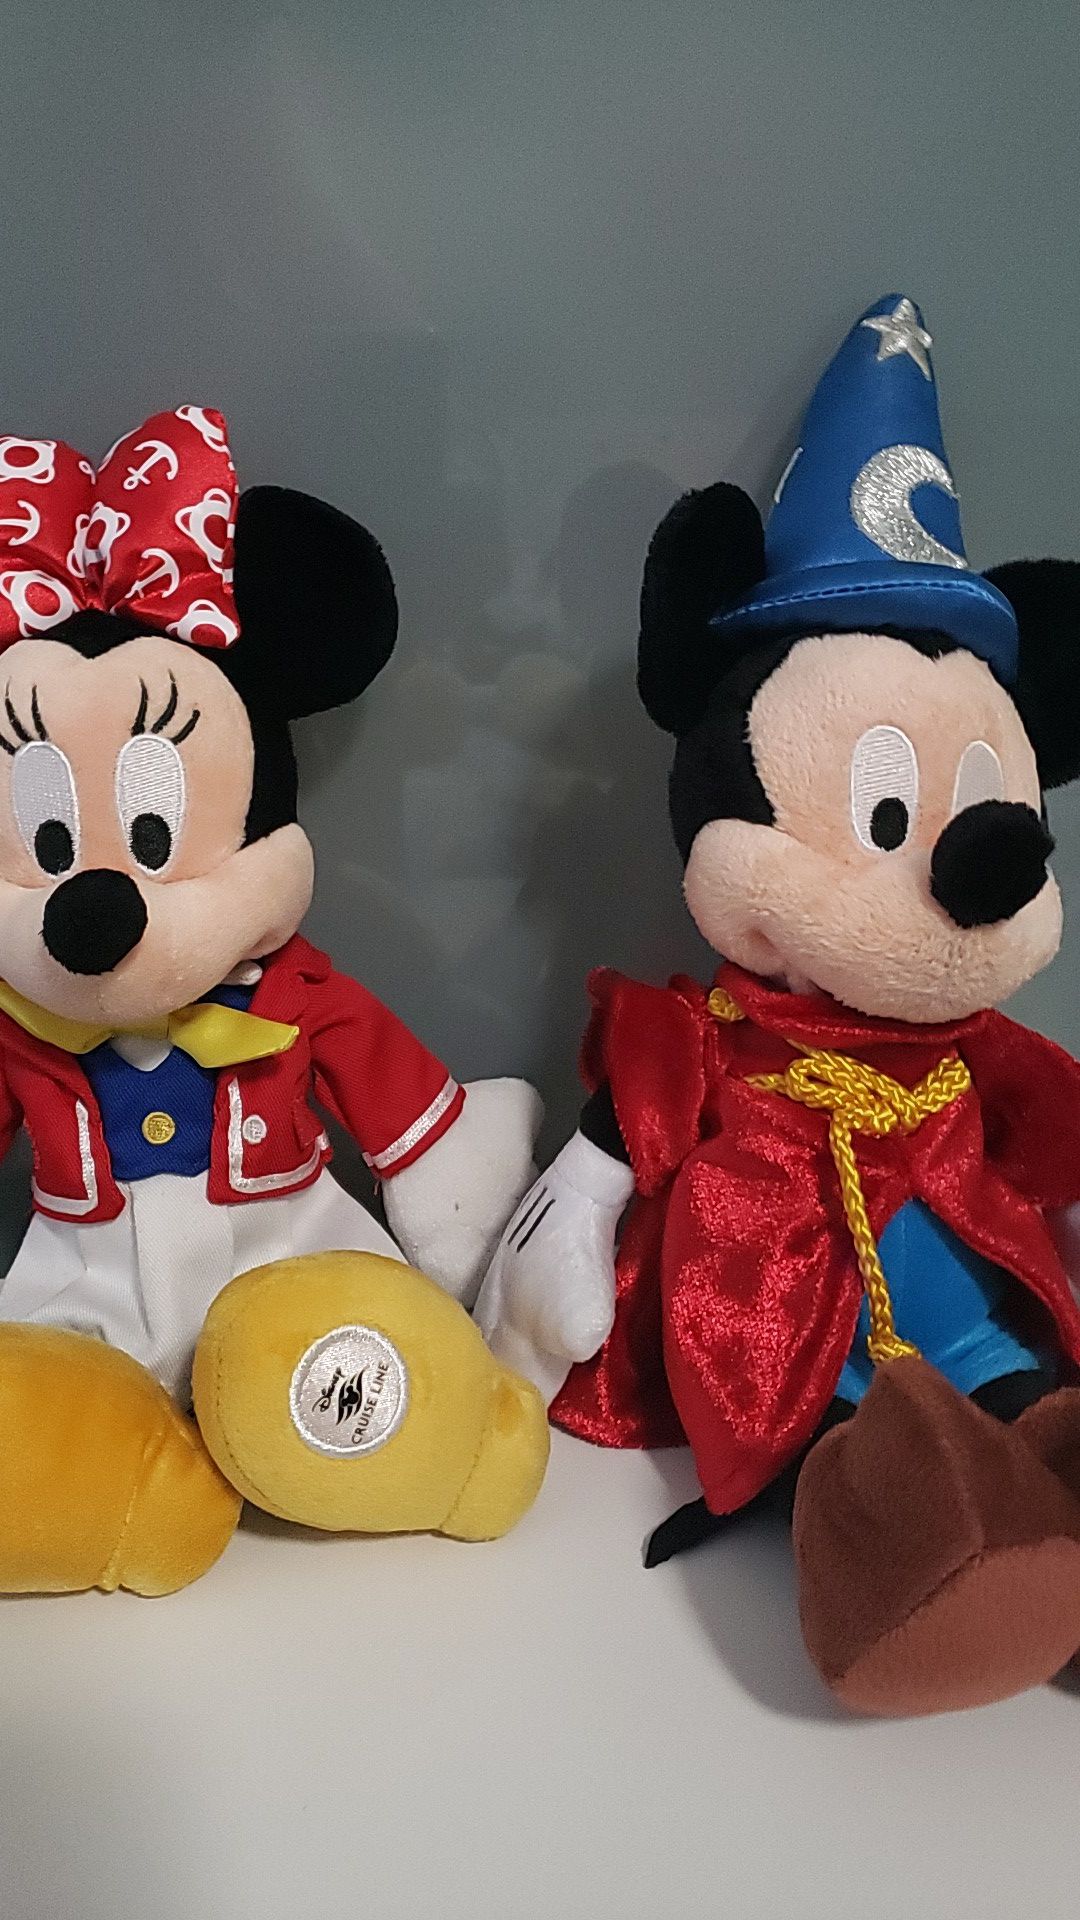 Micky and Minnie plushies